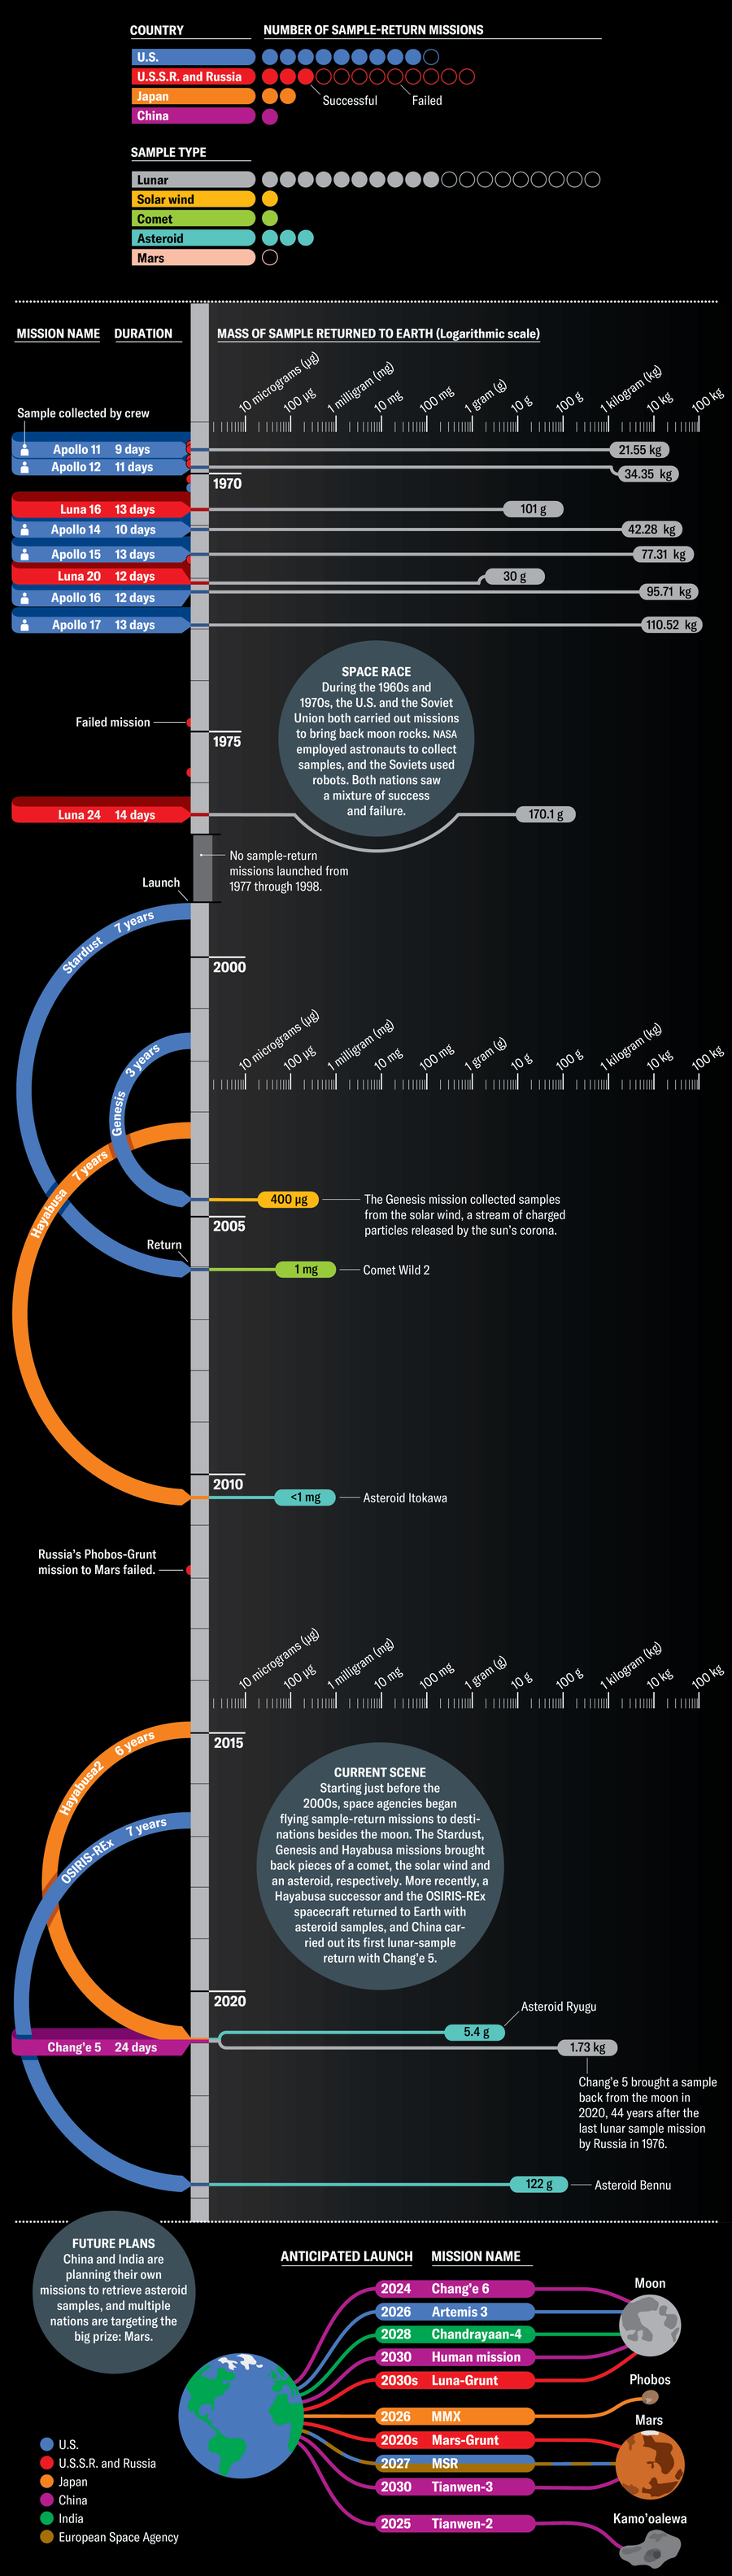 Timeline shows space samples returned to Earth over time by mass of sample, location and lead country/agency. A supplementary chart breaks down future missions by anticipated launch date, mission name, lead agency and destination. 